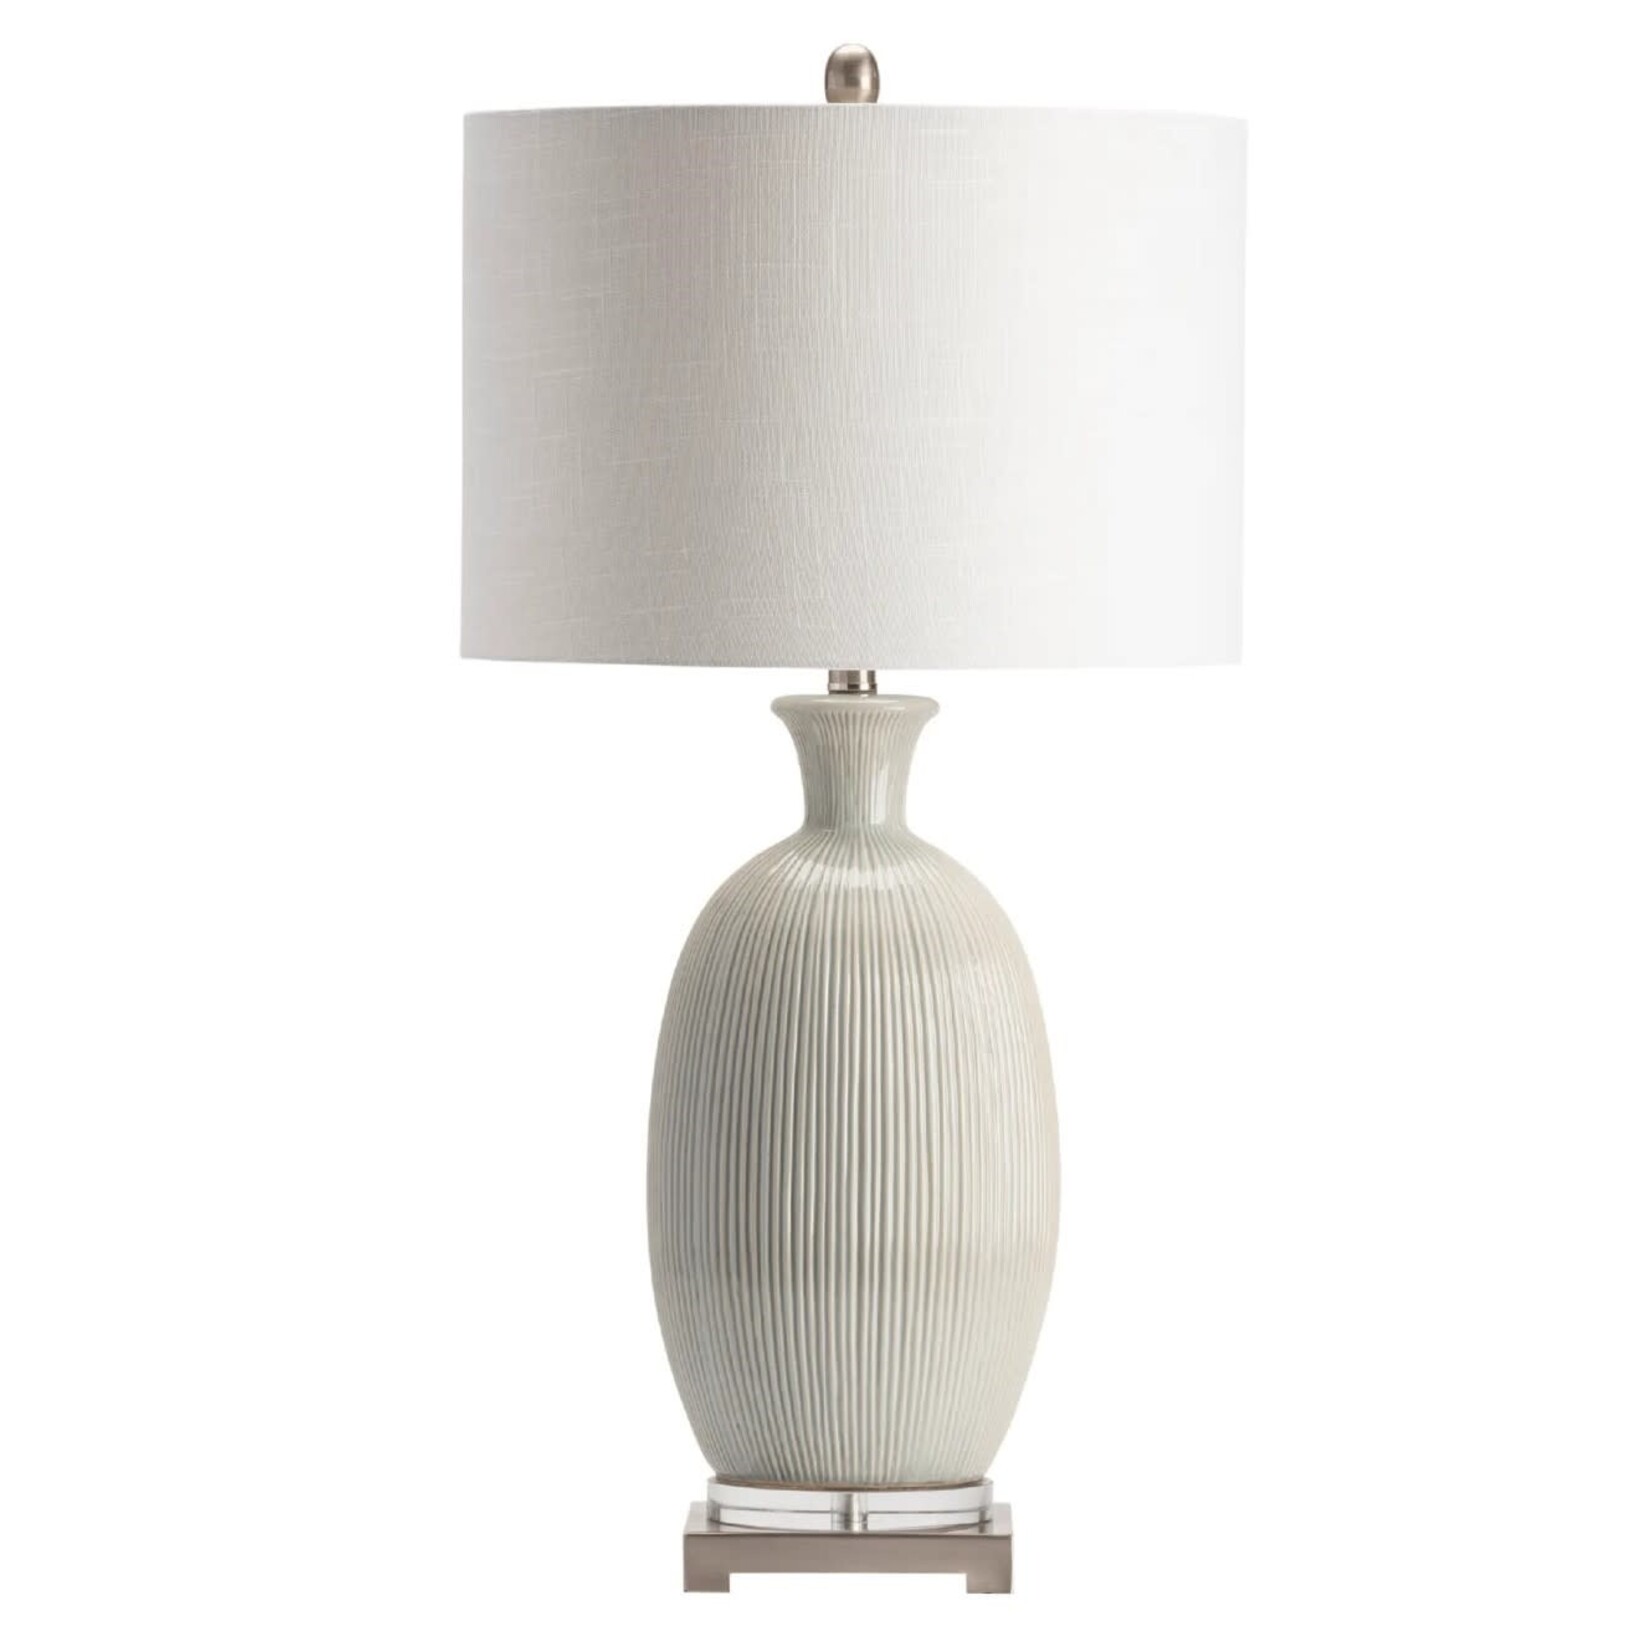 Mickler & Co. Carrie Table Lamp